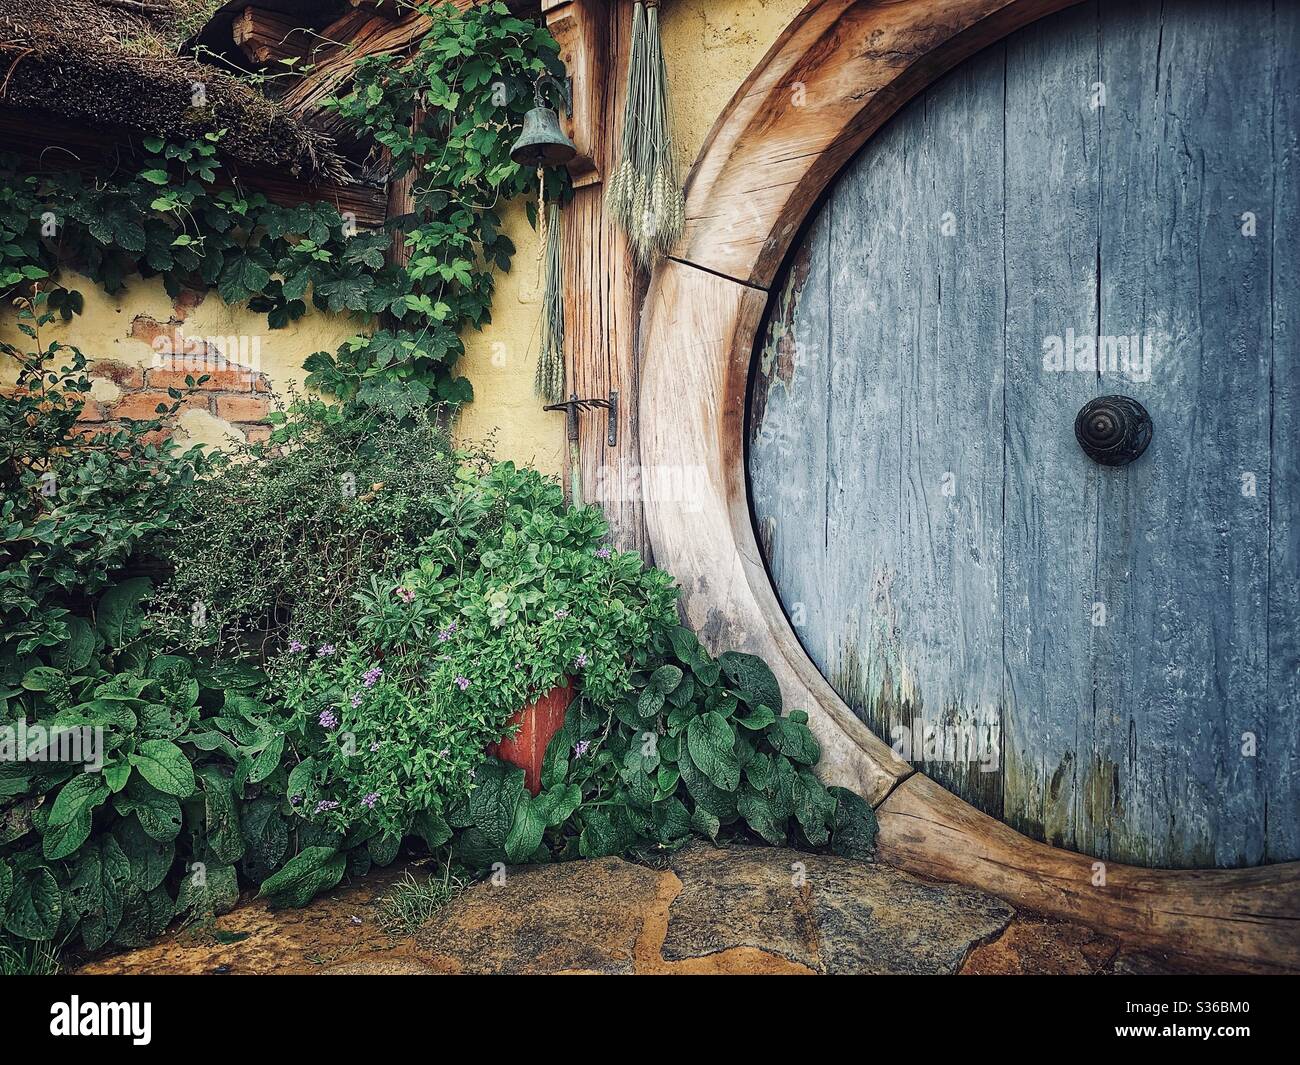 Hobbiton. Bucolic place in New Zealand where the hobbits from the Middle Earth live. Lord of the rings movie set. Blue wooden door Stock Photo